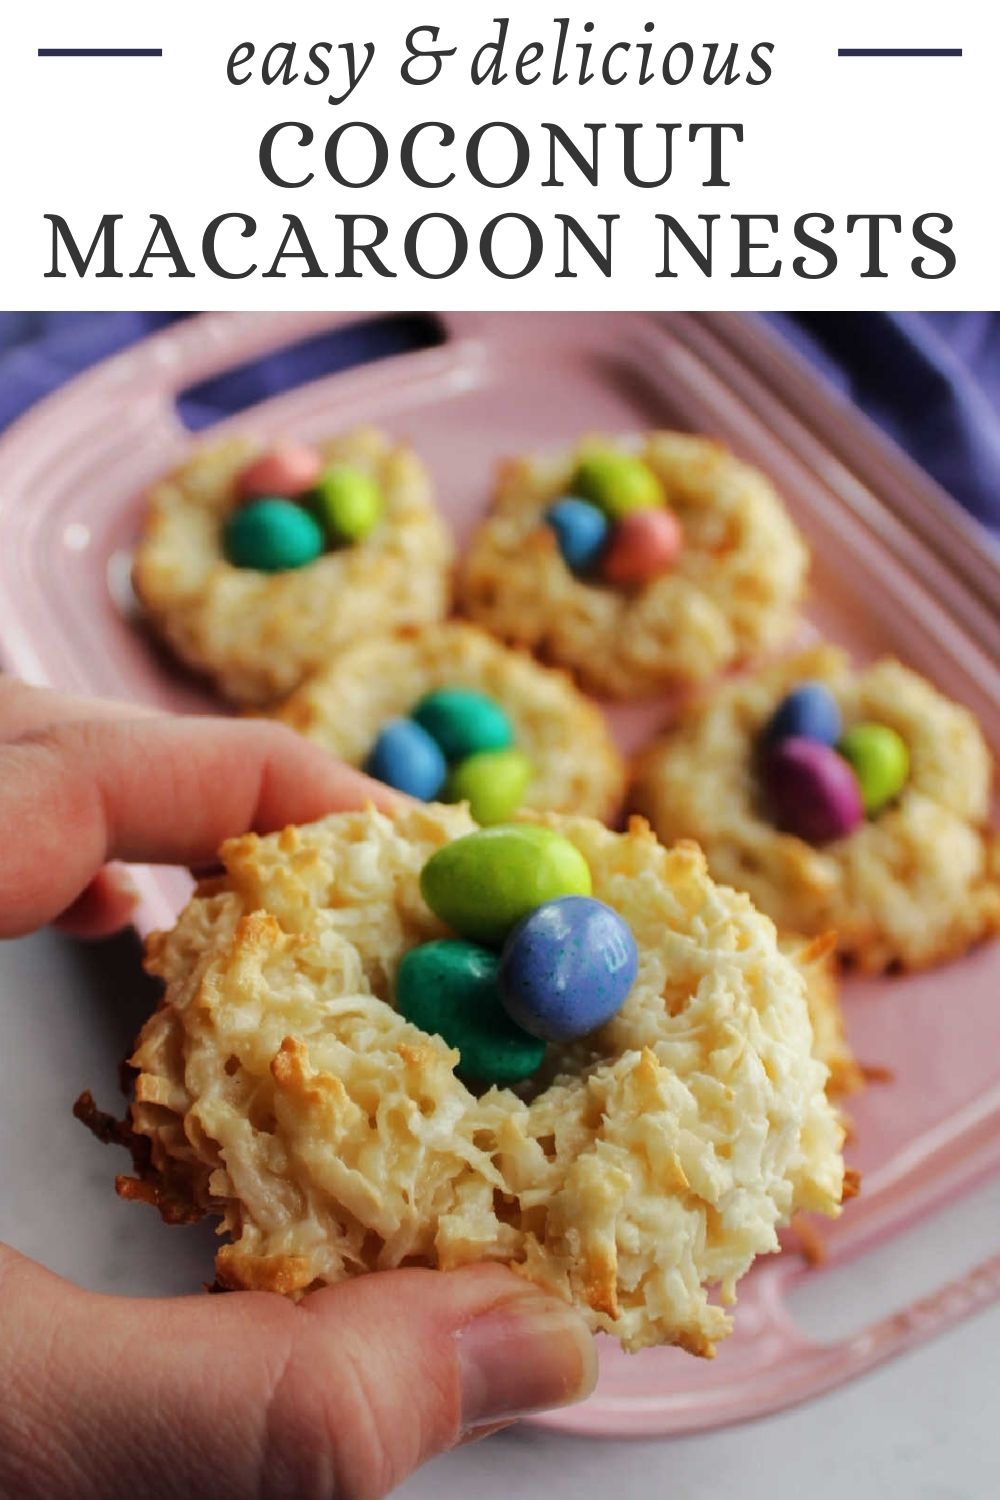 Coconut macaroon nests are such and easy and tasty treat. They are a perfect way to celebrate spring or serve them as an Easter dessert.